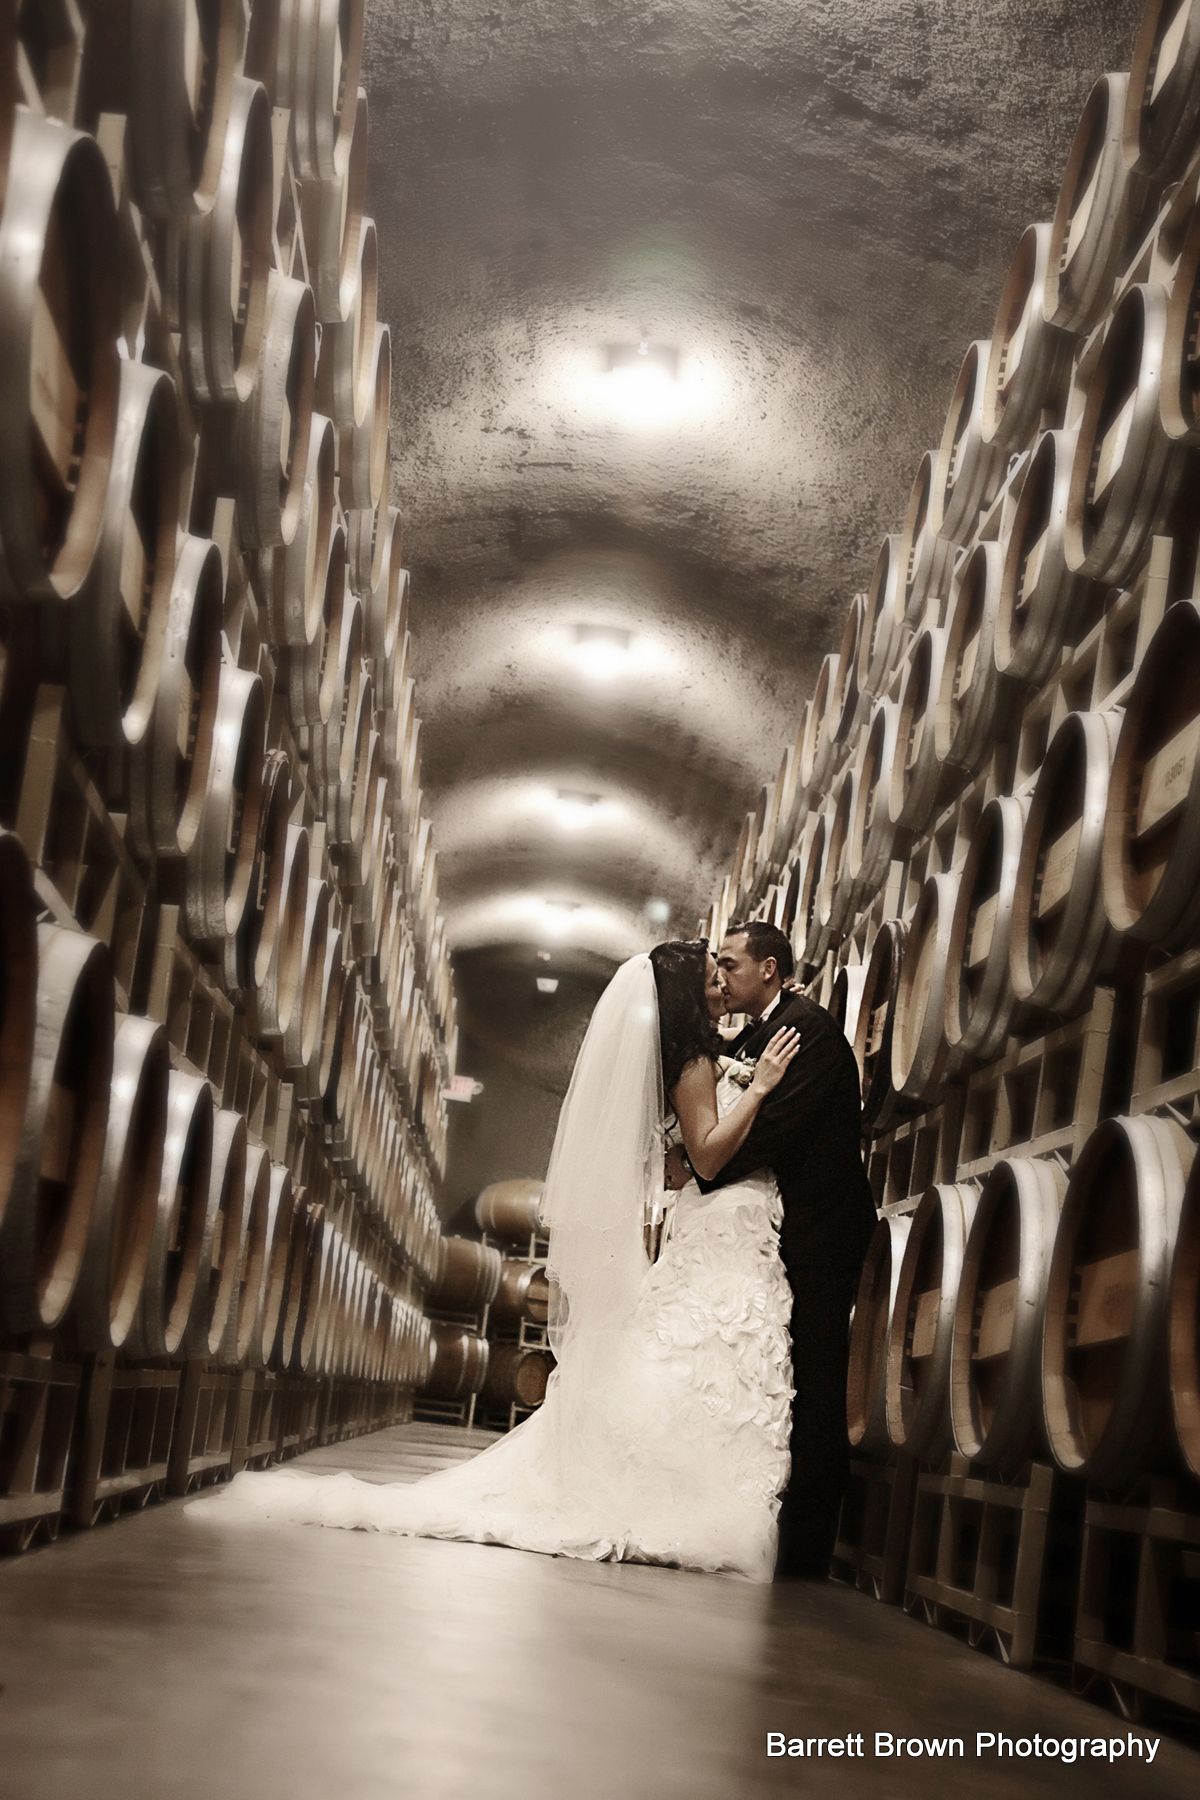 Groom dipping bride while the couple kiss in a warehouse between two four-barrel high alcohol fermentation barrels